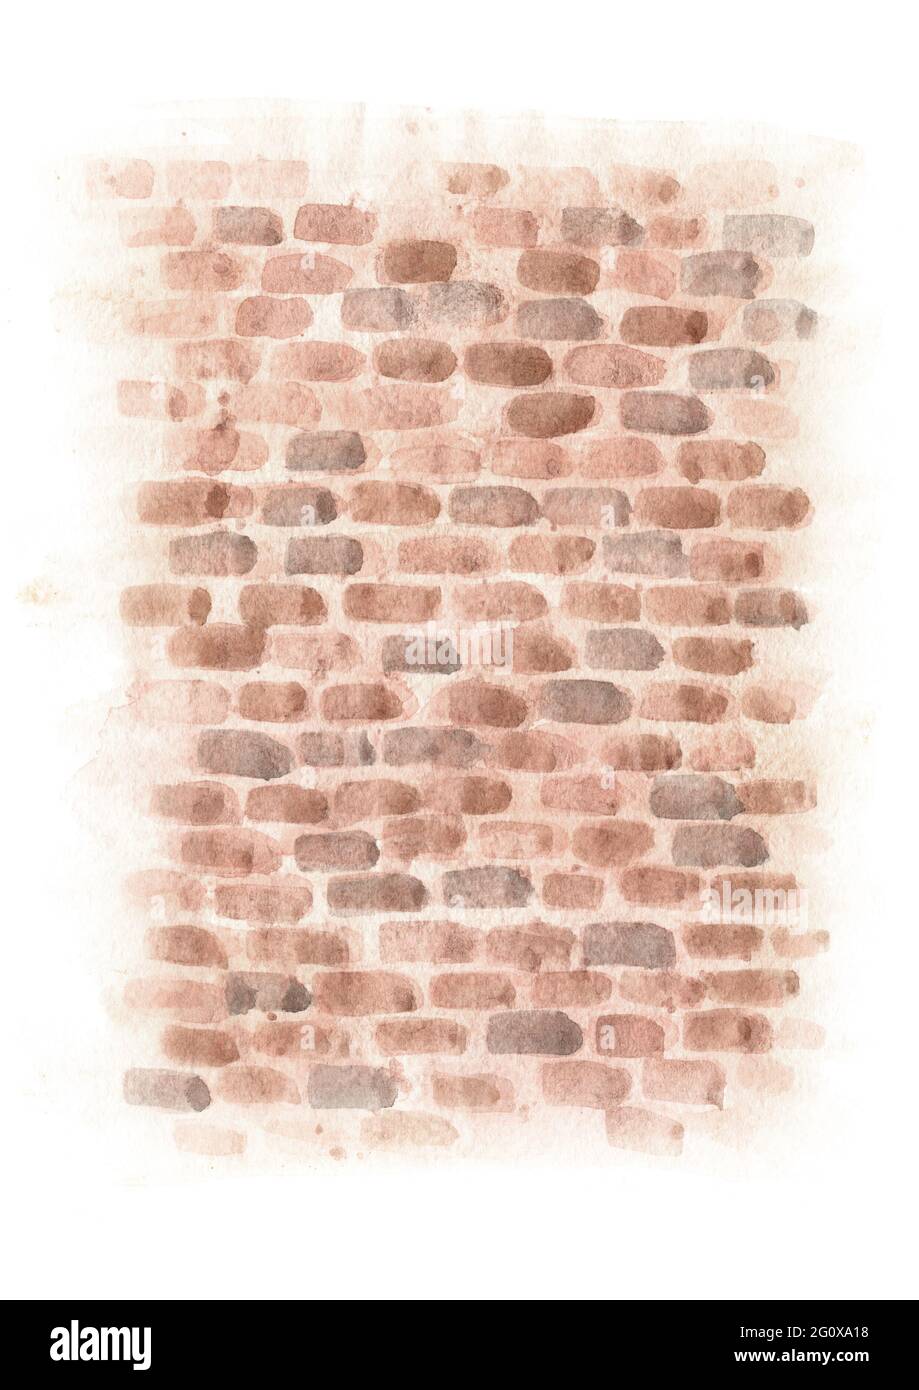 Brick grunge wall. Hand drawn watercolor illustration,  isolated on white background Stock Photo